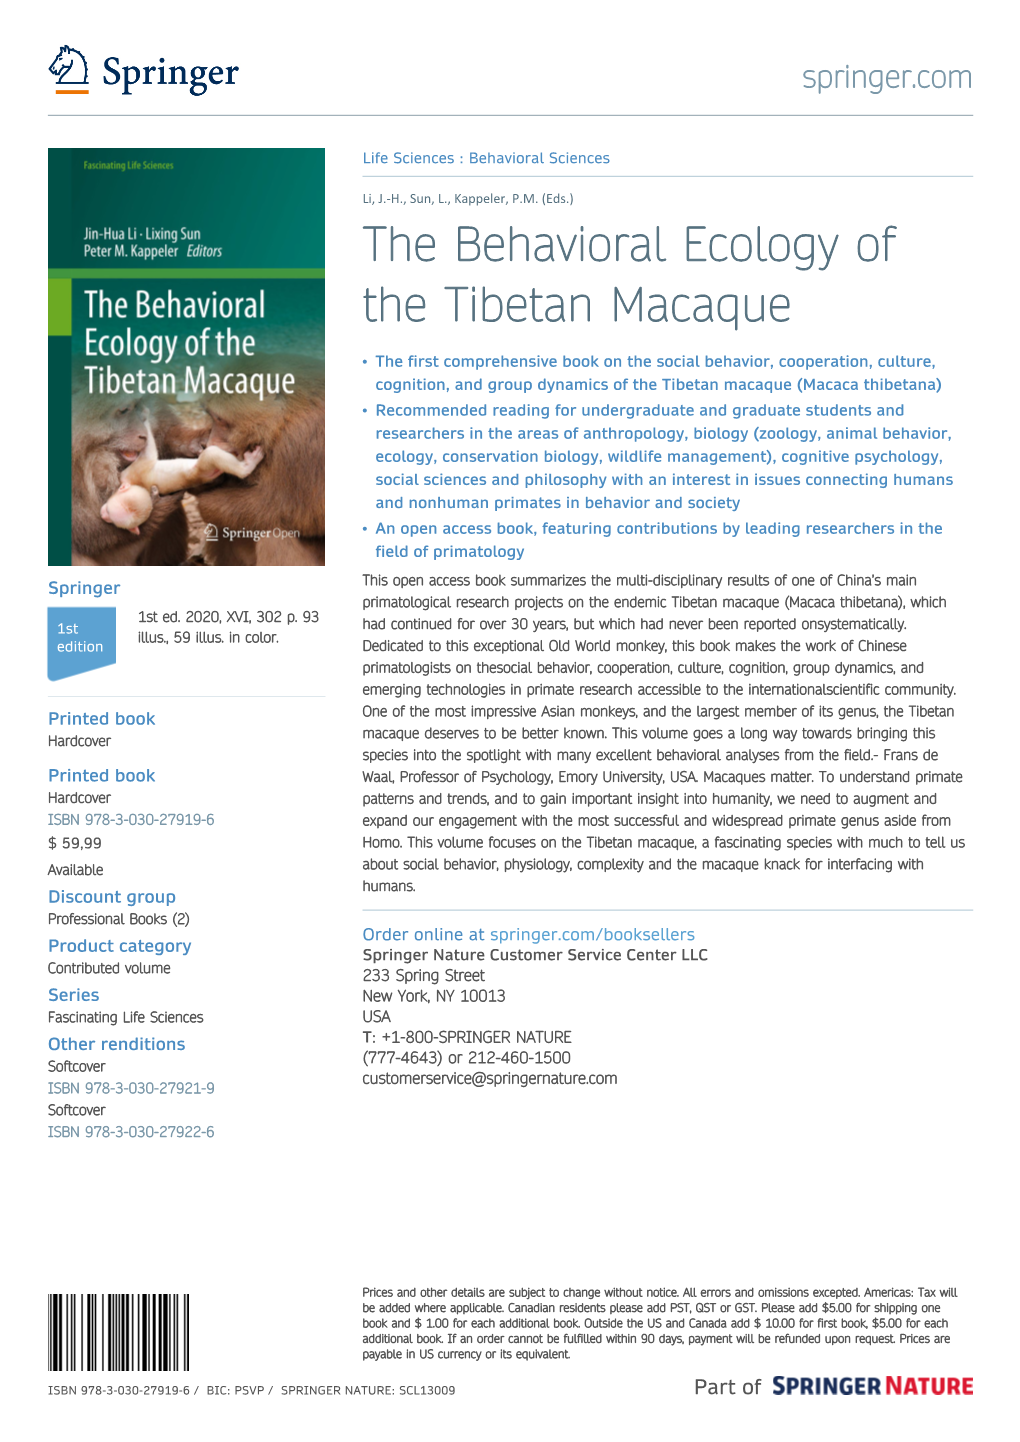 The Behavioral Ecology of the Tibetan Macaque